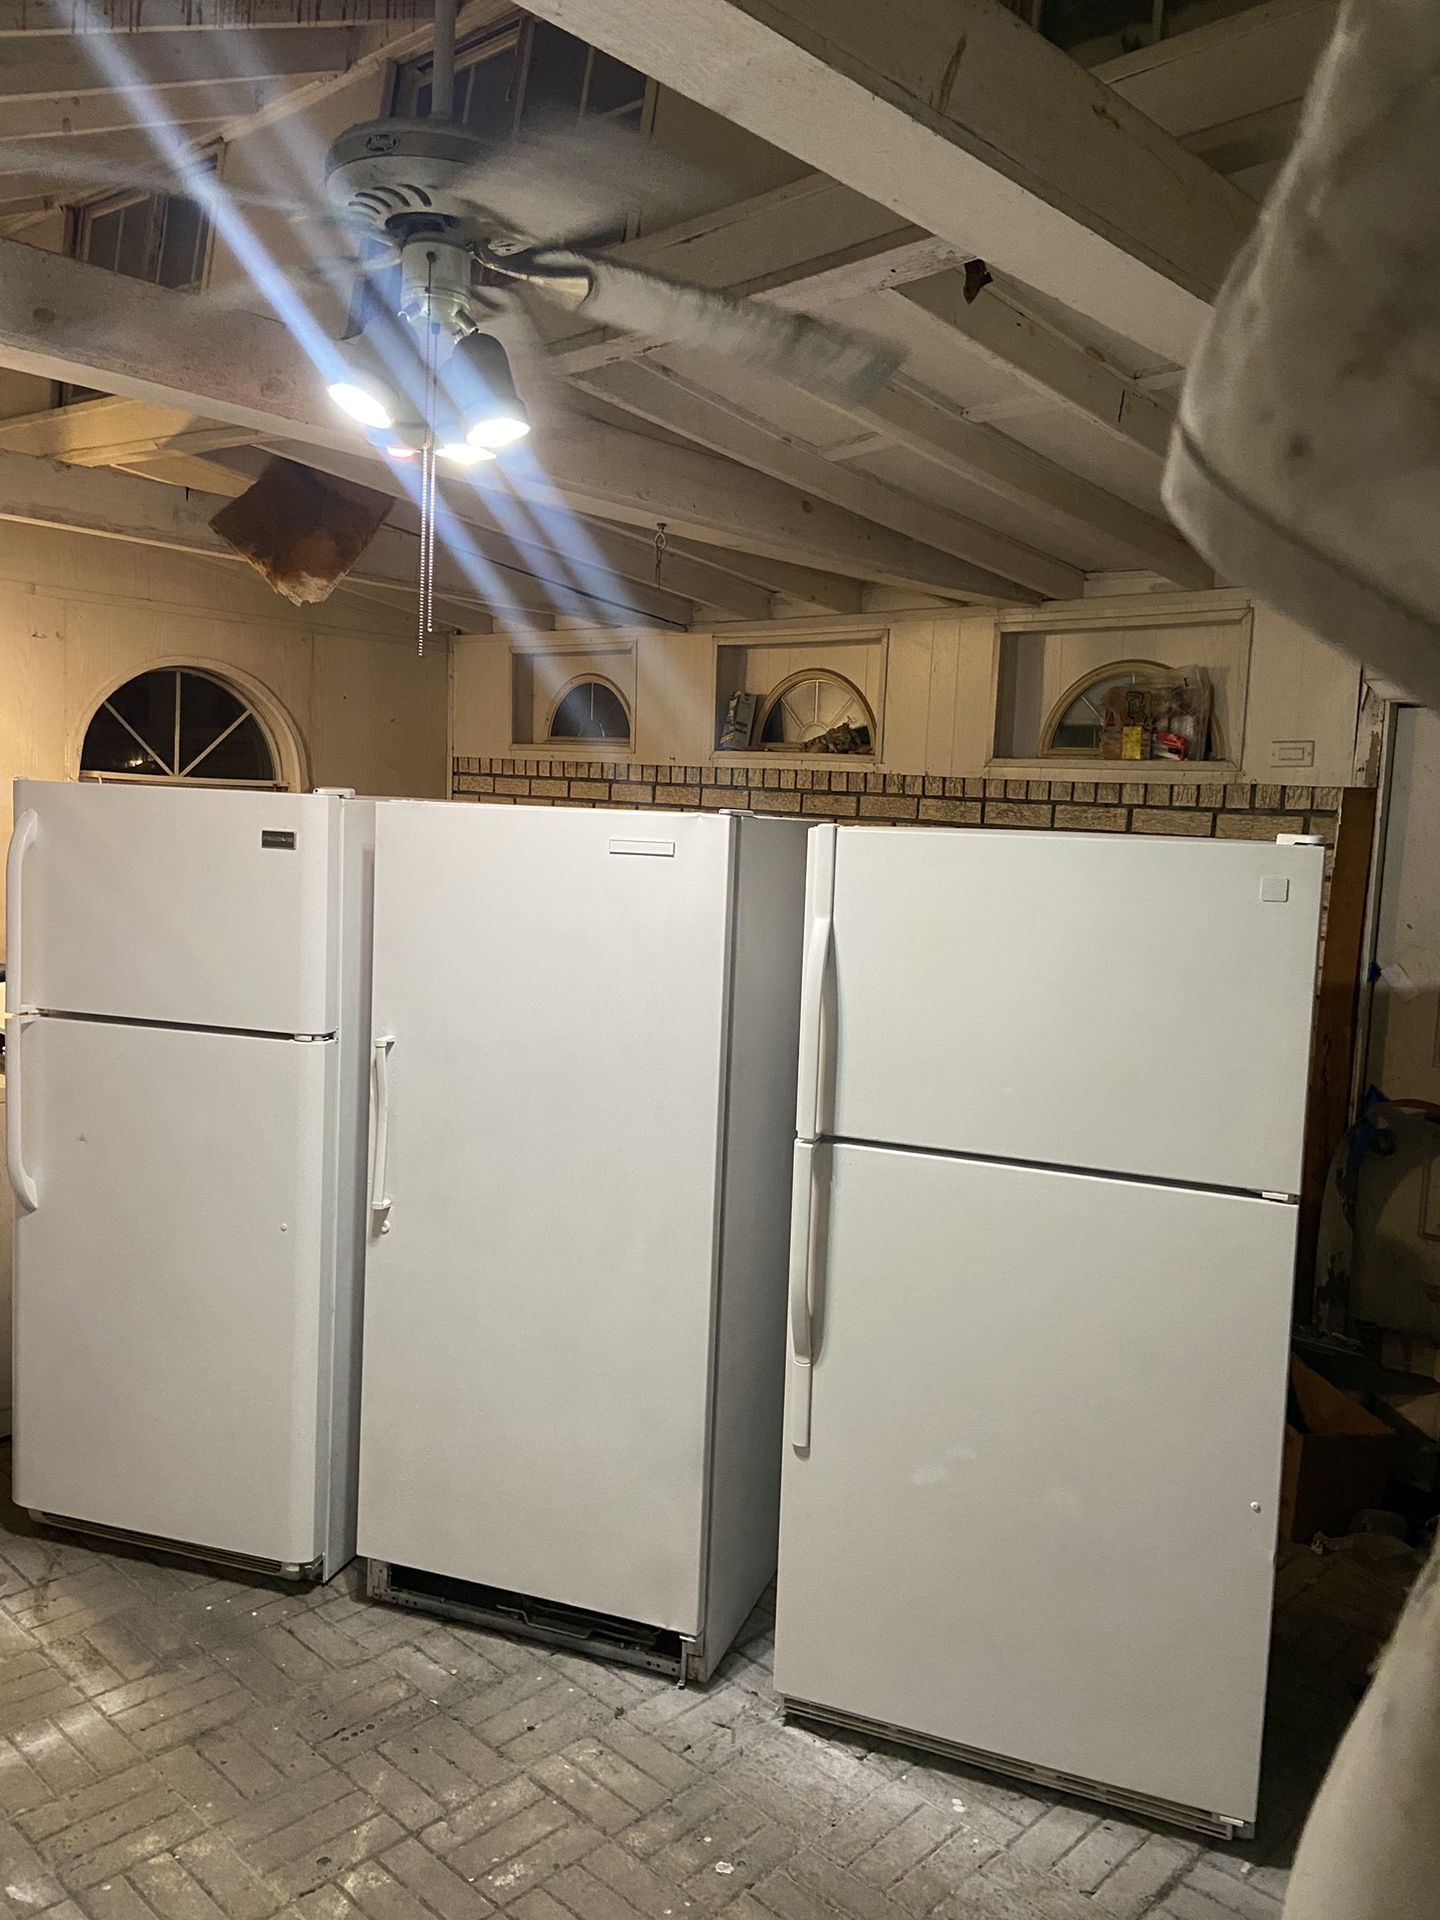 FRIDGE OR FREEZER STARTING AT $275 & UP. THEY RUN LIKE BRAND NEW! THEY HAVE BEEN CLEANED & SMELL FRESH. IM IN MARRERO